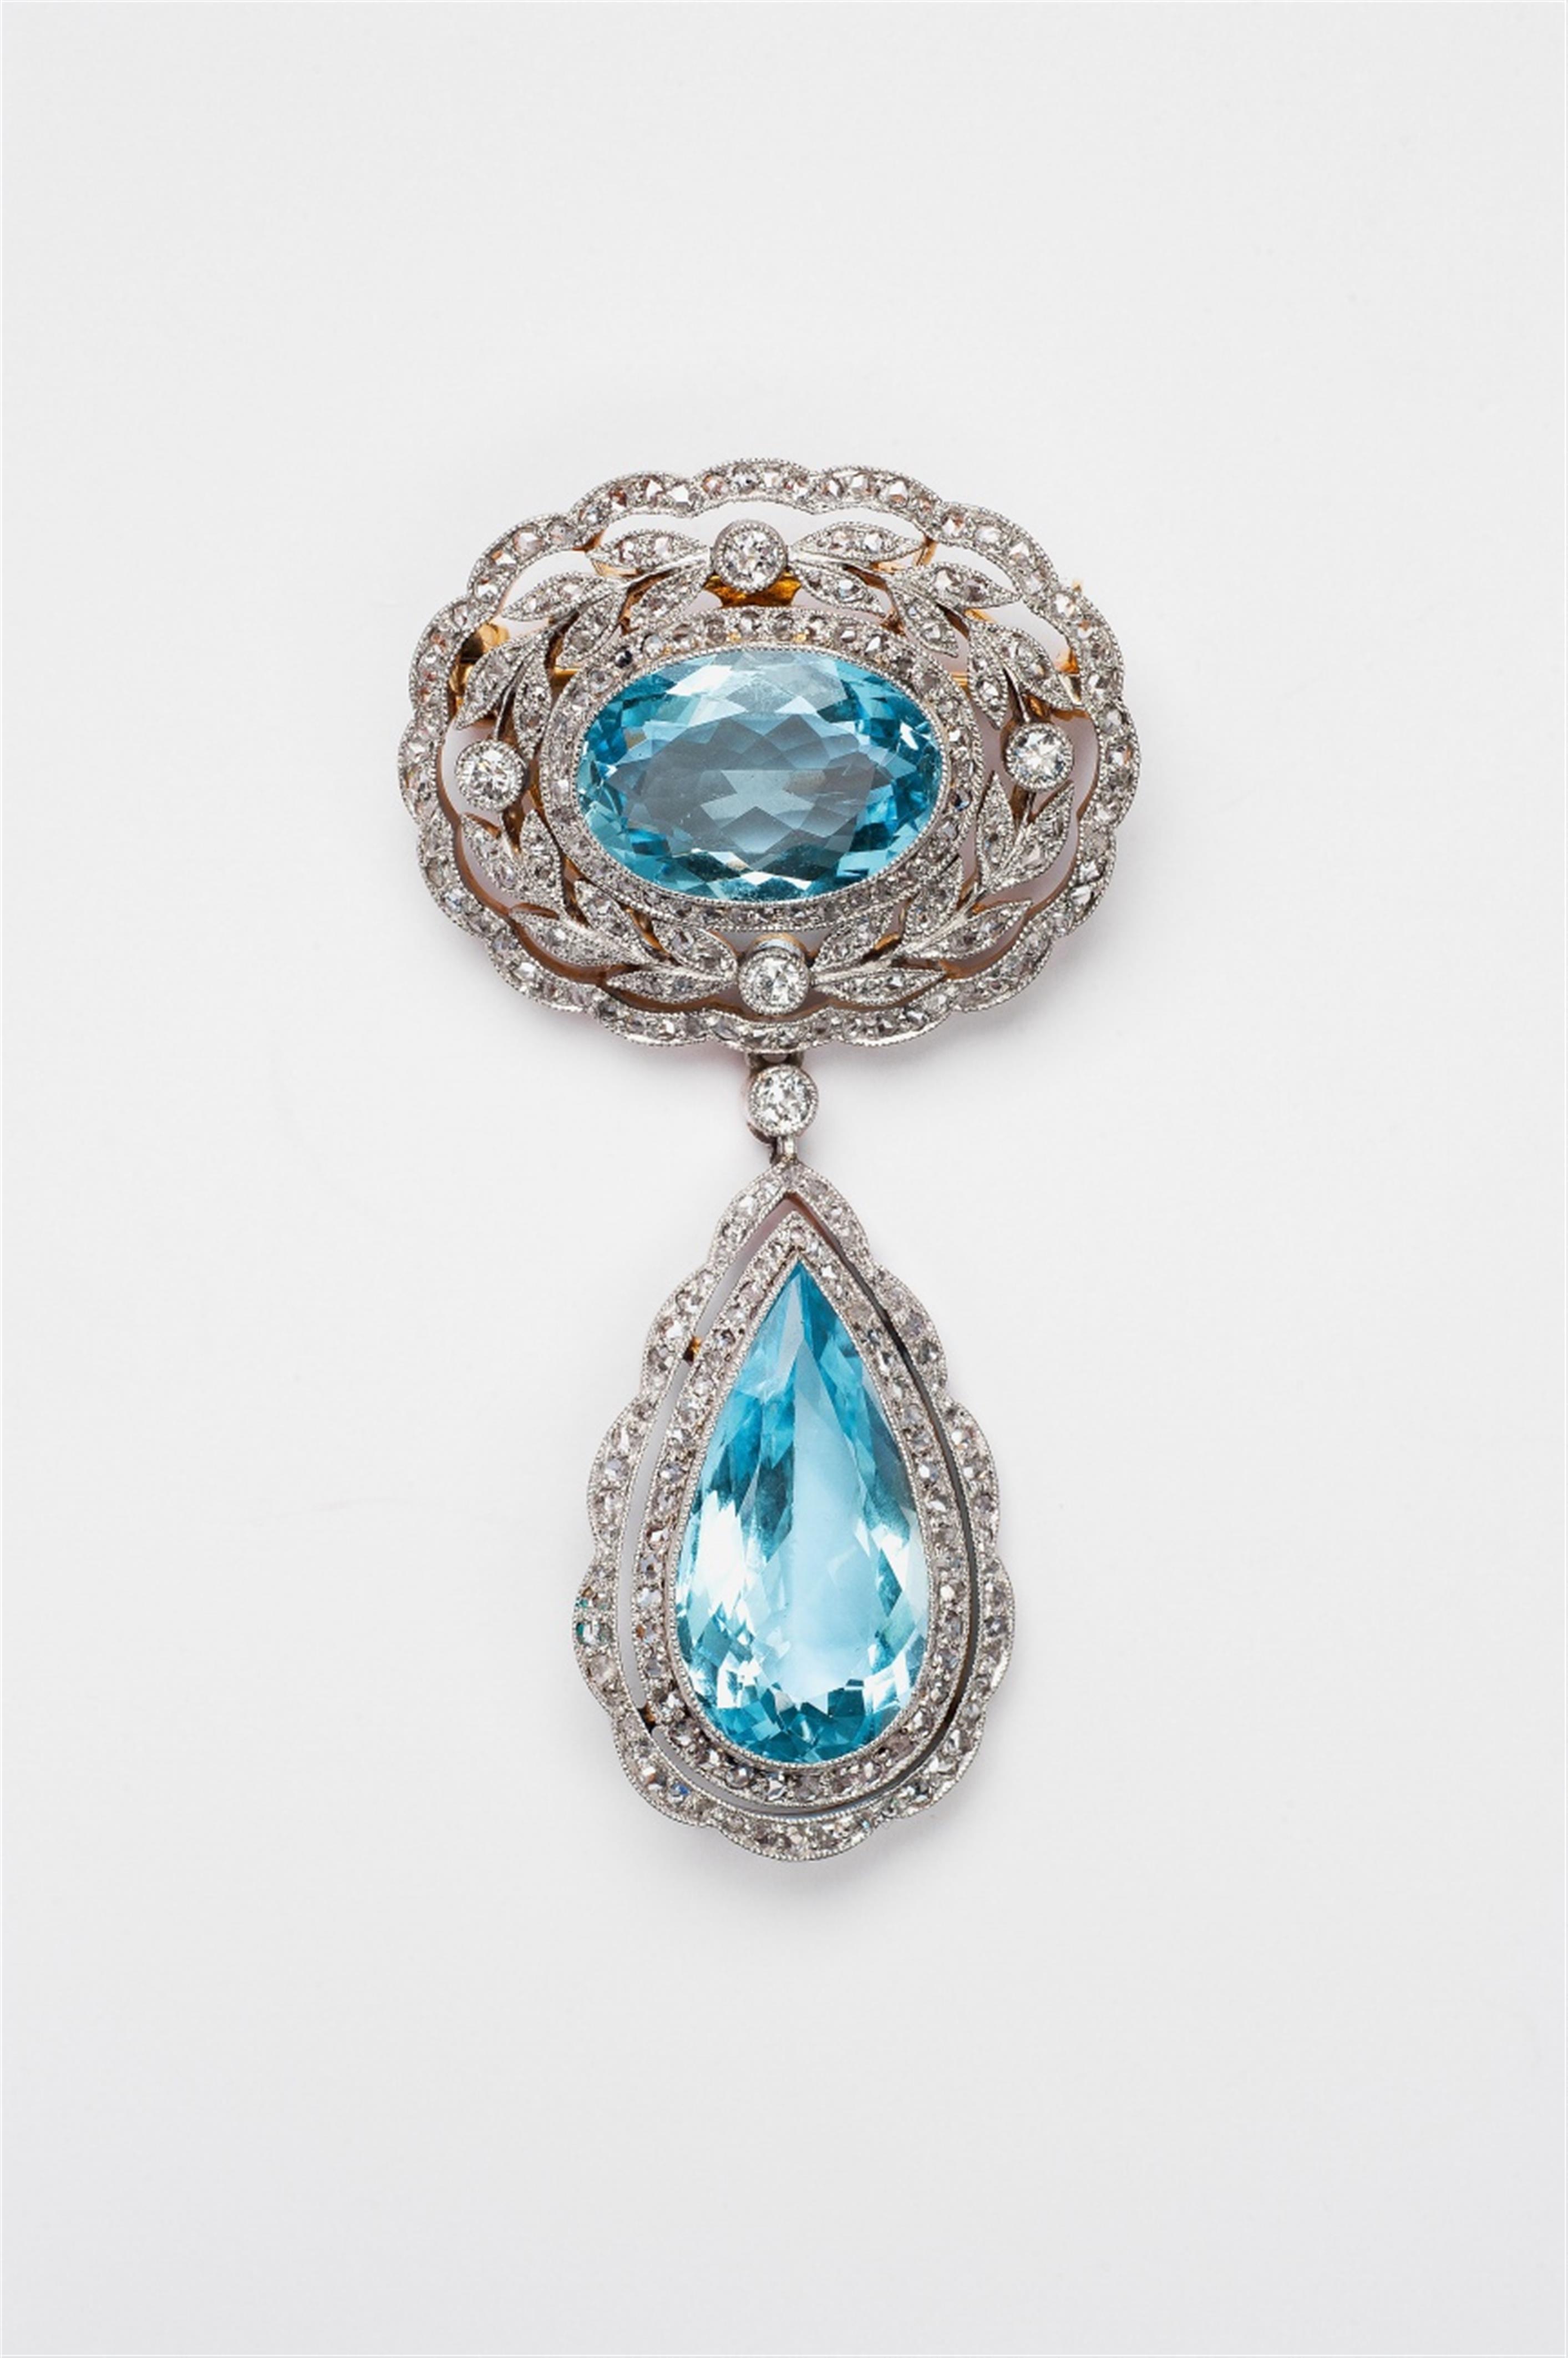 An 18k gold, diamond and aquamarine Belle Epoque brooch - image-1